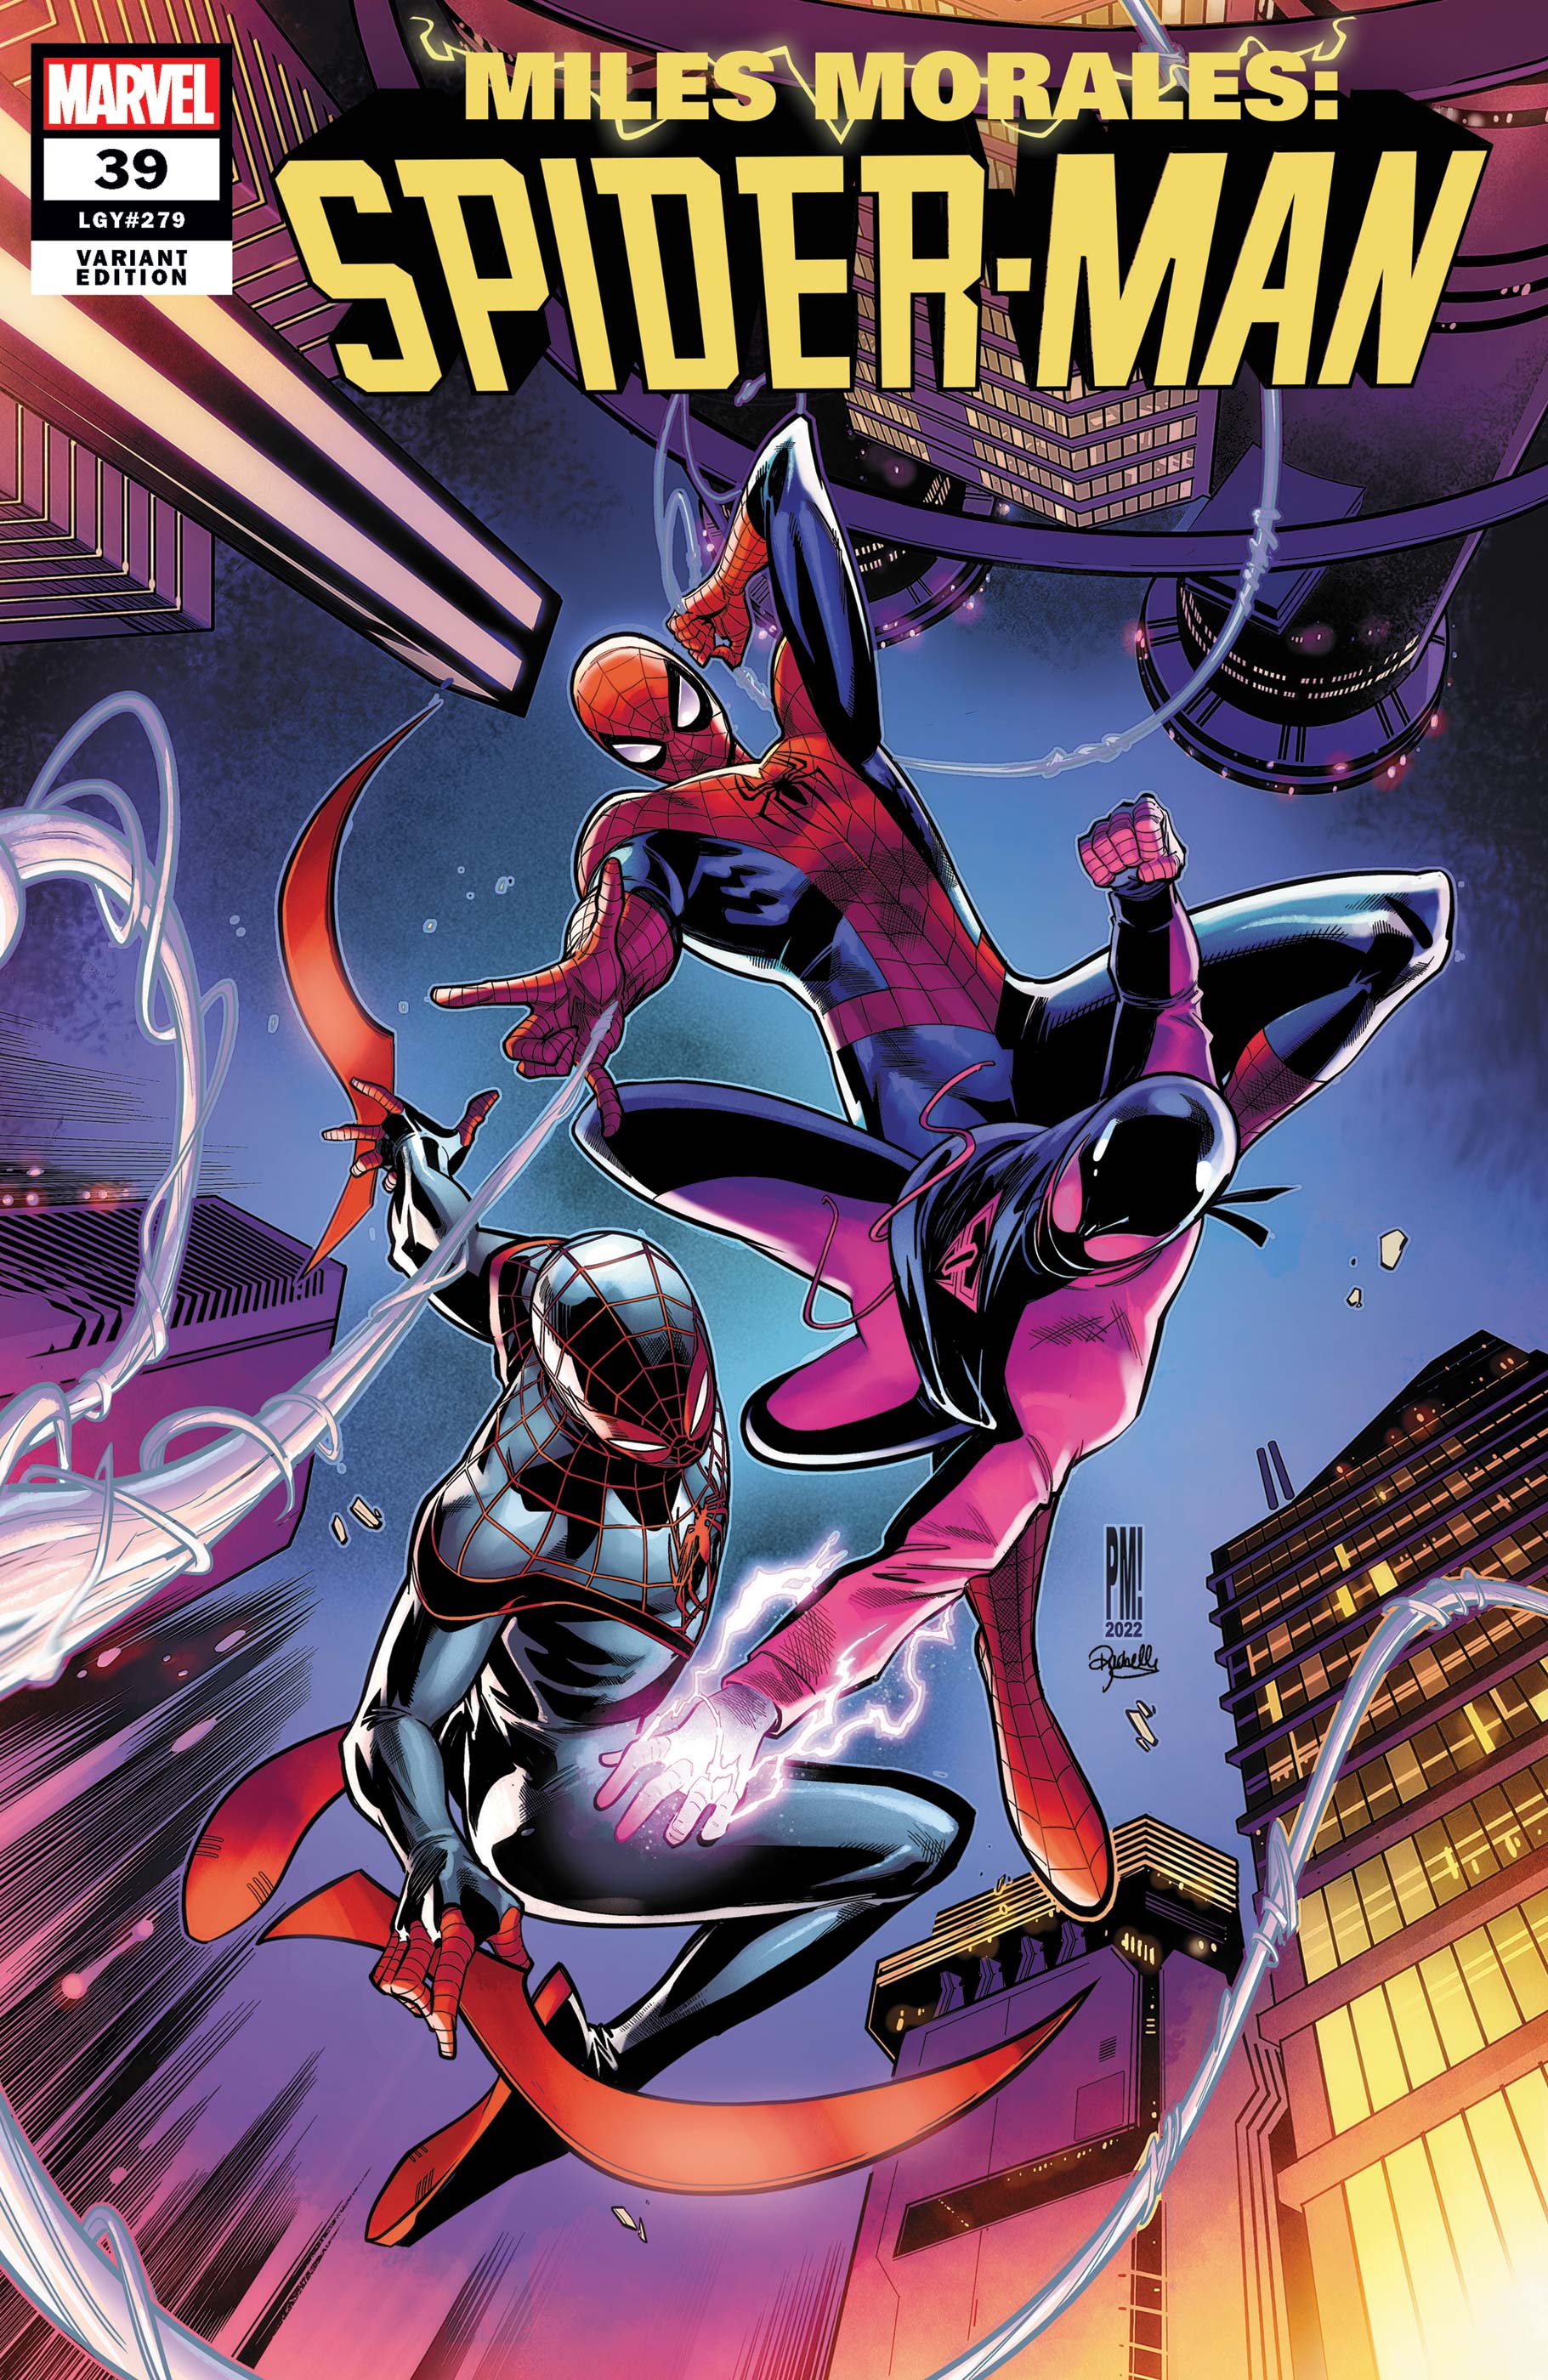 ComicList Previews: MILES MORALES SPIDER-MAN #39 - GoCollect